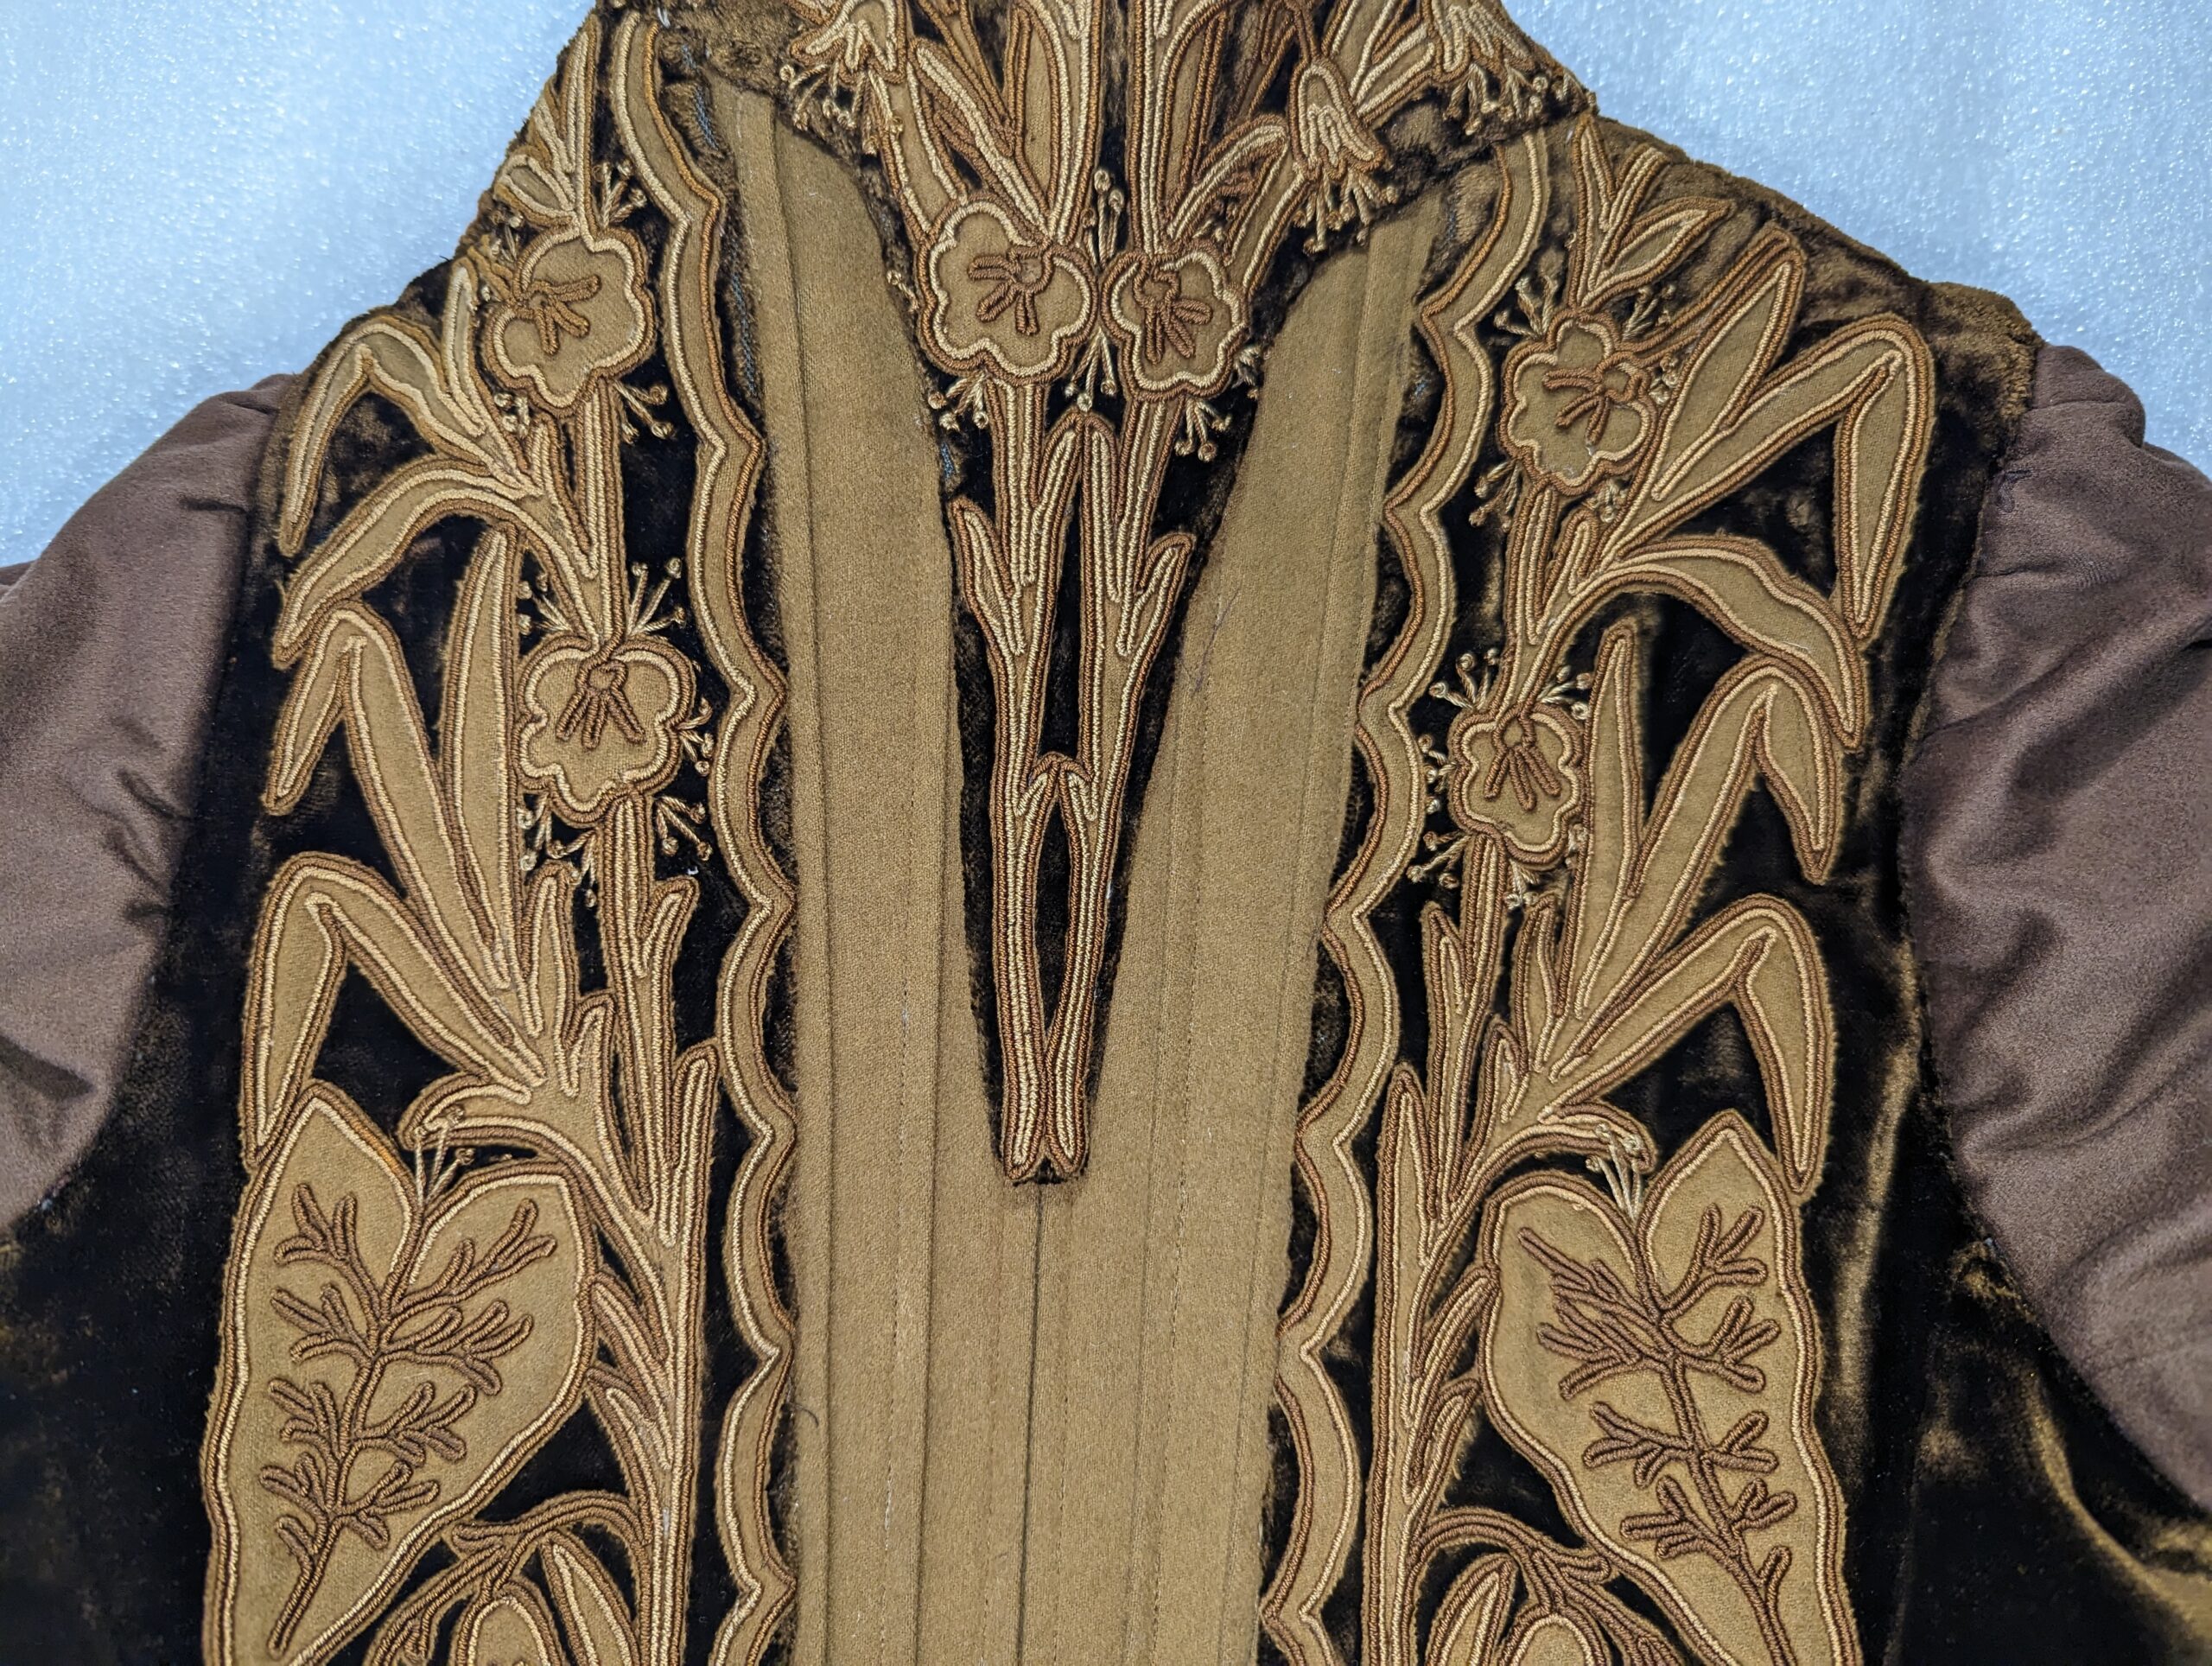 detail view of coat back